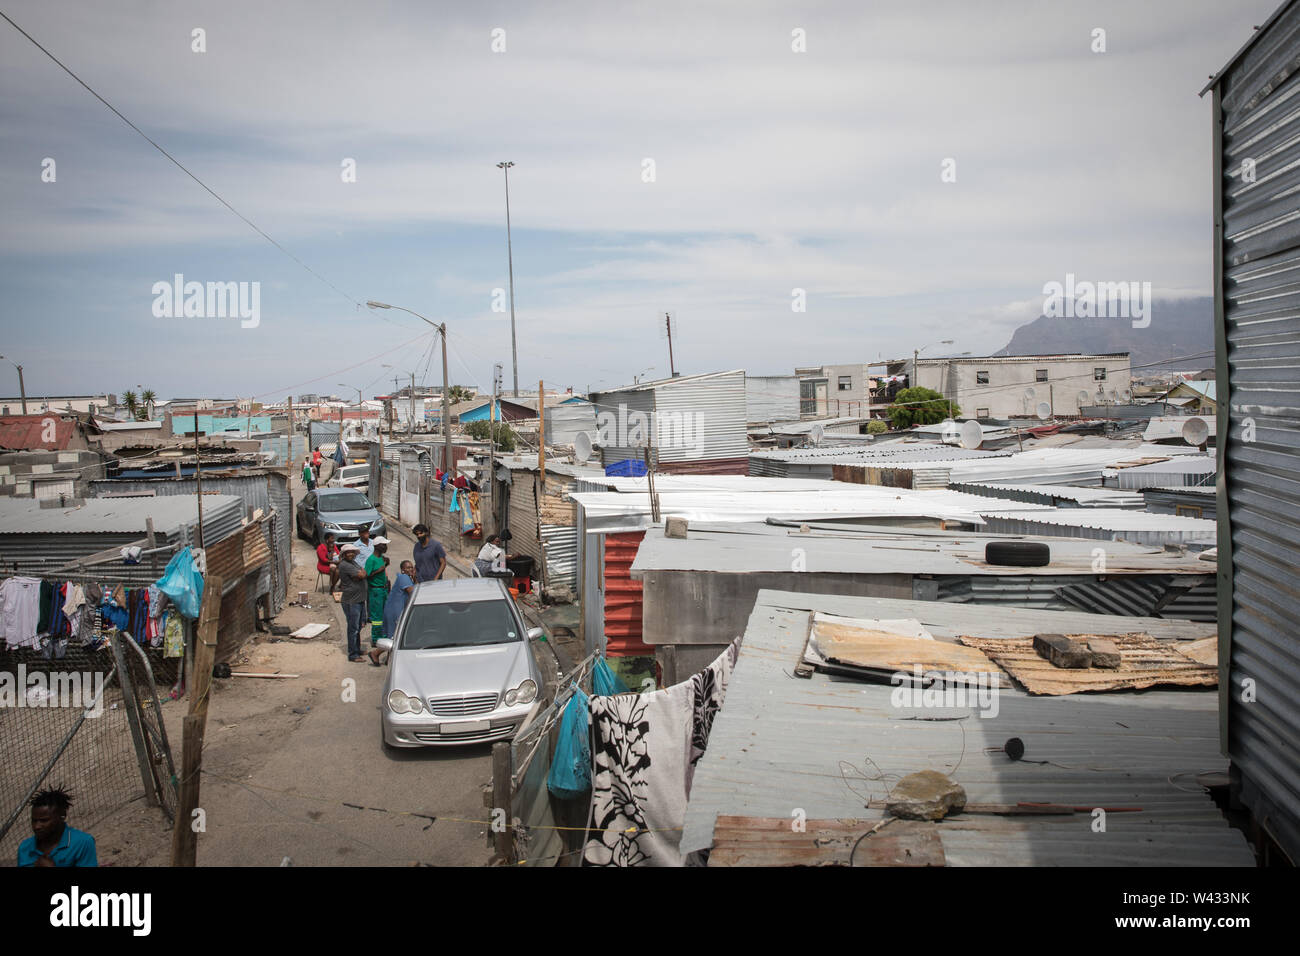 Residents of Joe Slovo Informal Settlement, Cape Town, Western Cape, South Africa have an uneasy living situation under the threat of forced evictions Stock Photo